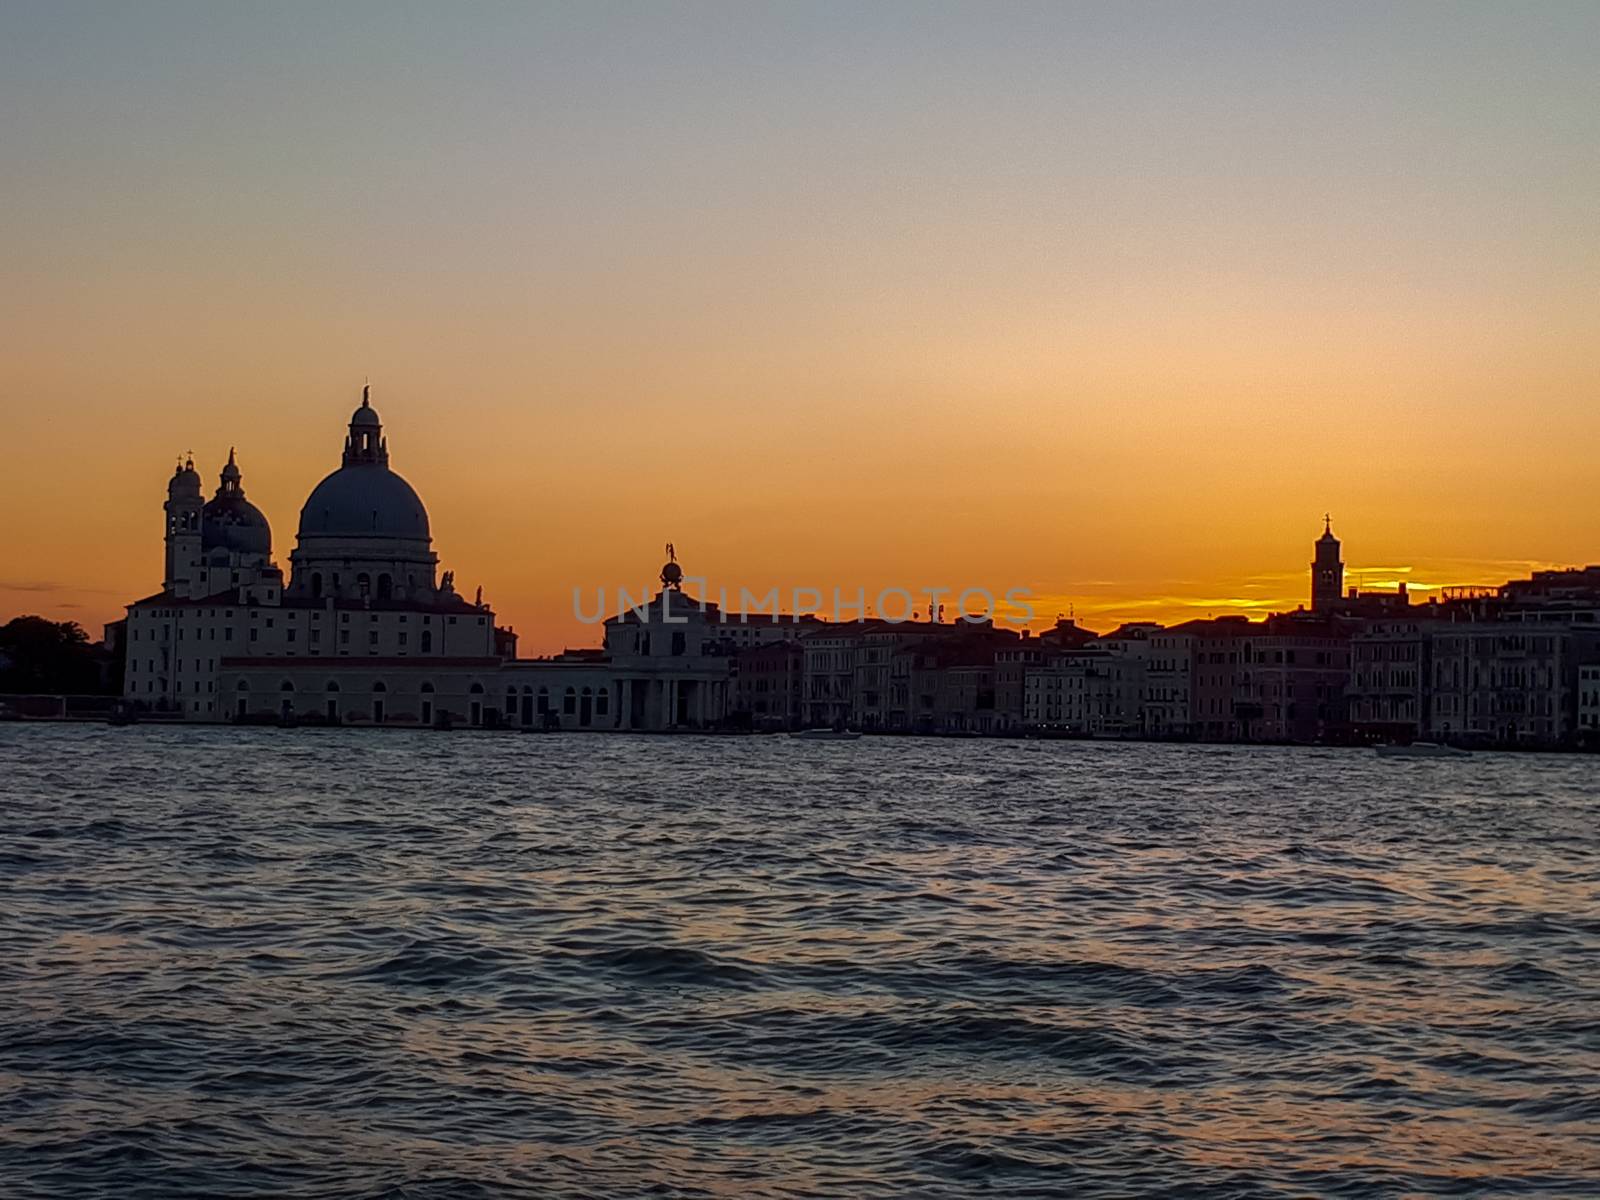 sunset in venice from the boat by Tevion25